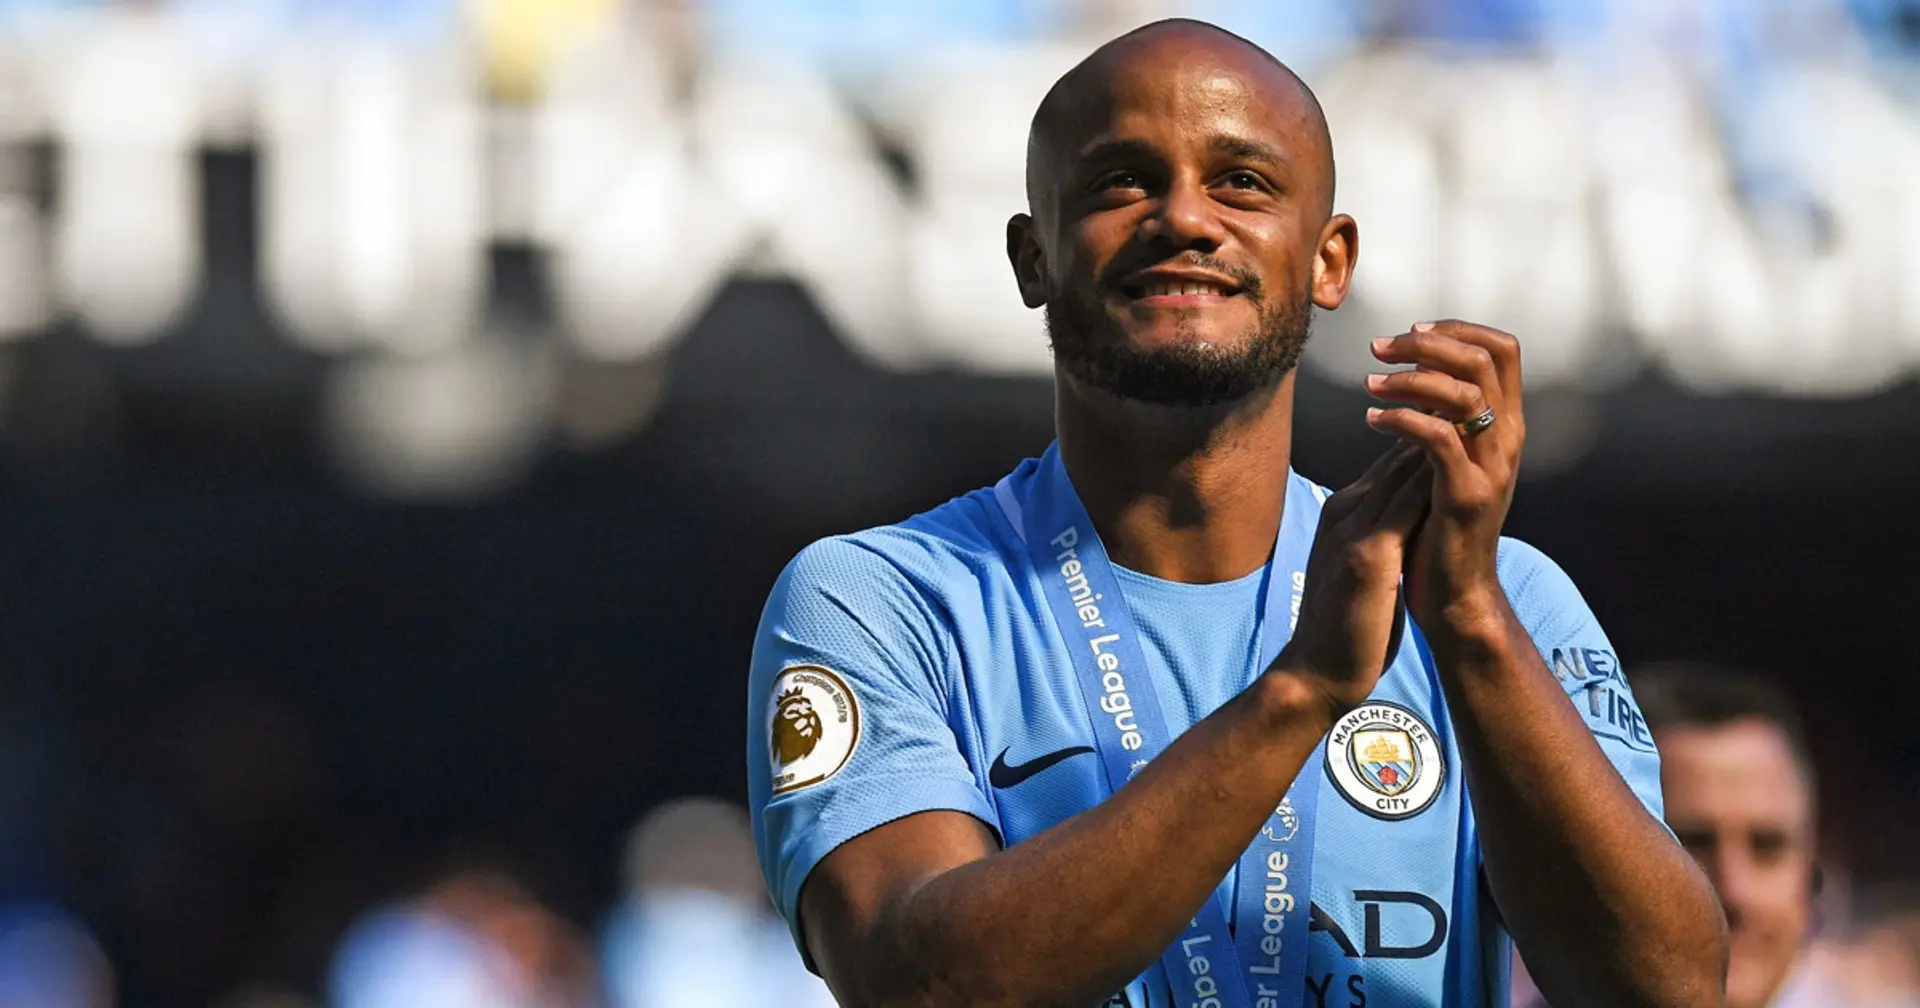 Vincent Kompany retires from professional football, becomes Anderlecht's head coach